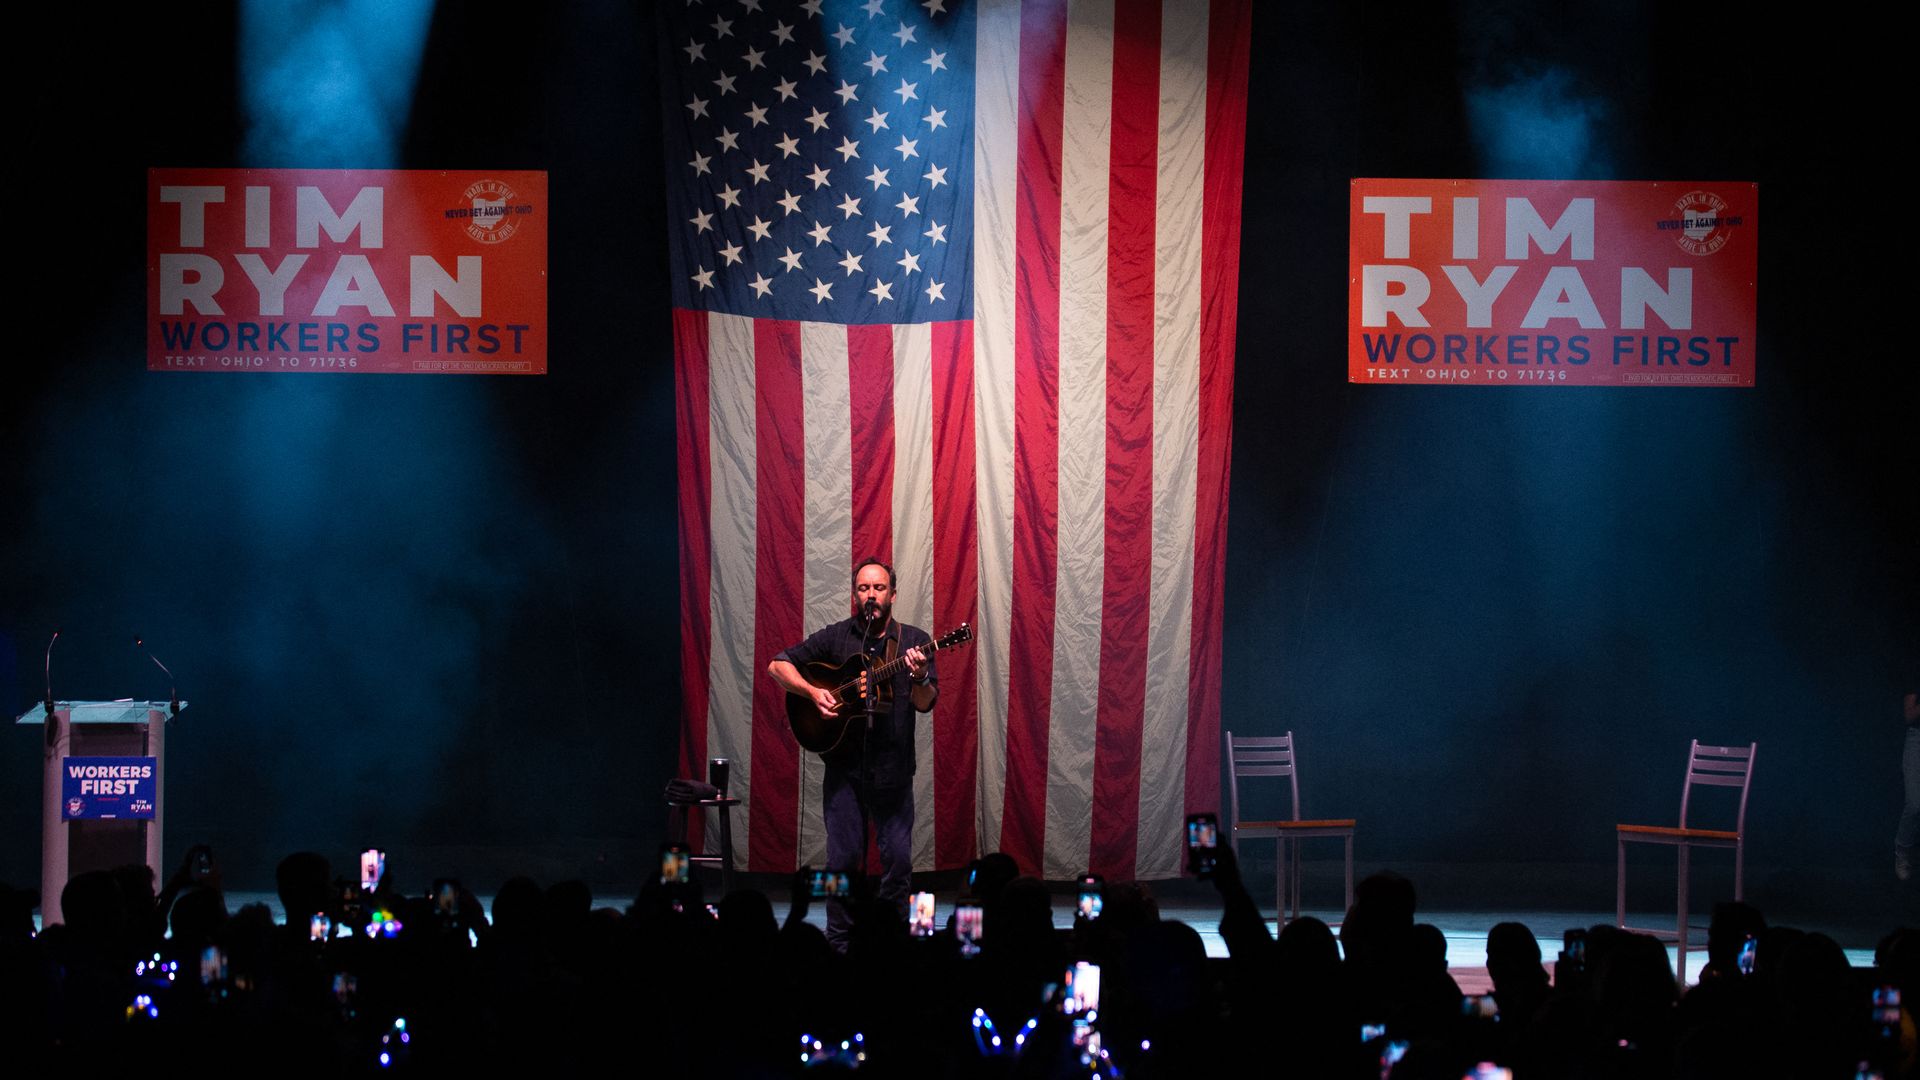 Dave Matthews Band performing on stage in front of an American flag and a Tim Ryan campaign sign. 